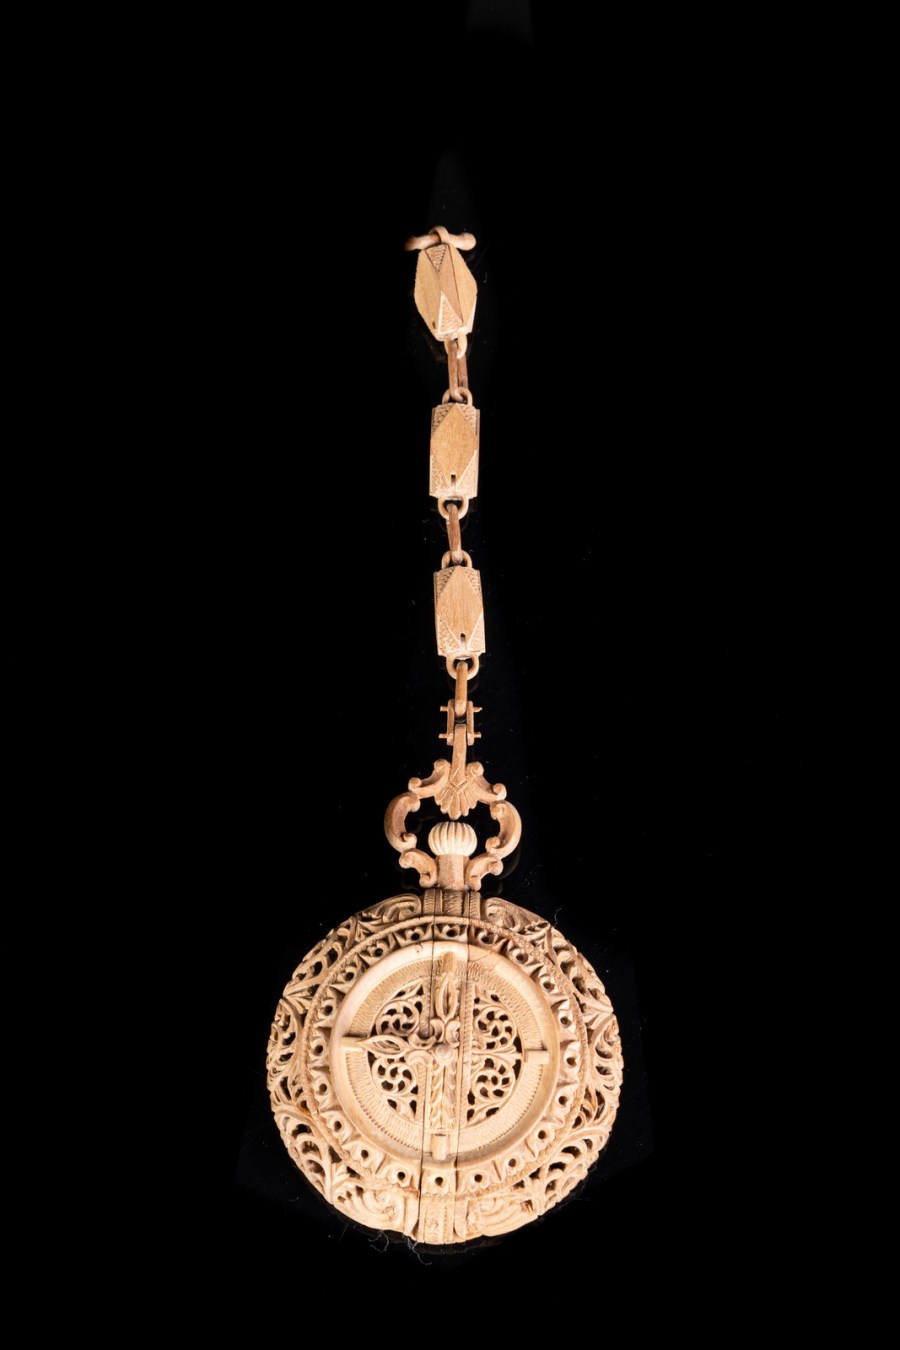 A sandalwood watch shaped item deliciously carved with Mughal buildings and figures
Northern India, possibly Rajasthan, late 19th-early 20th century (Arte Indiana )